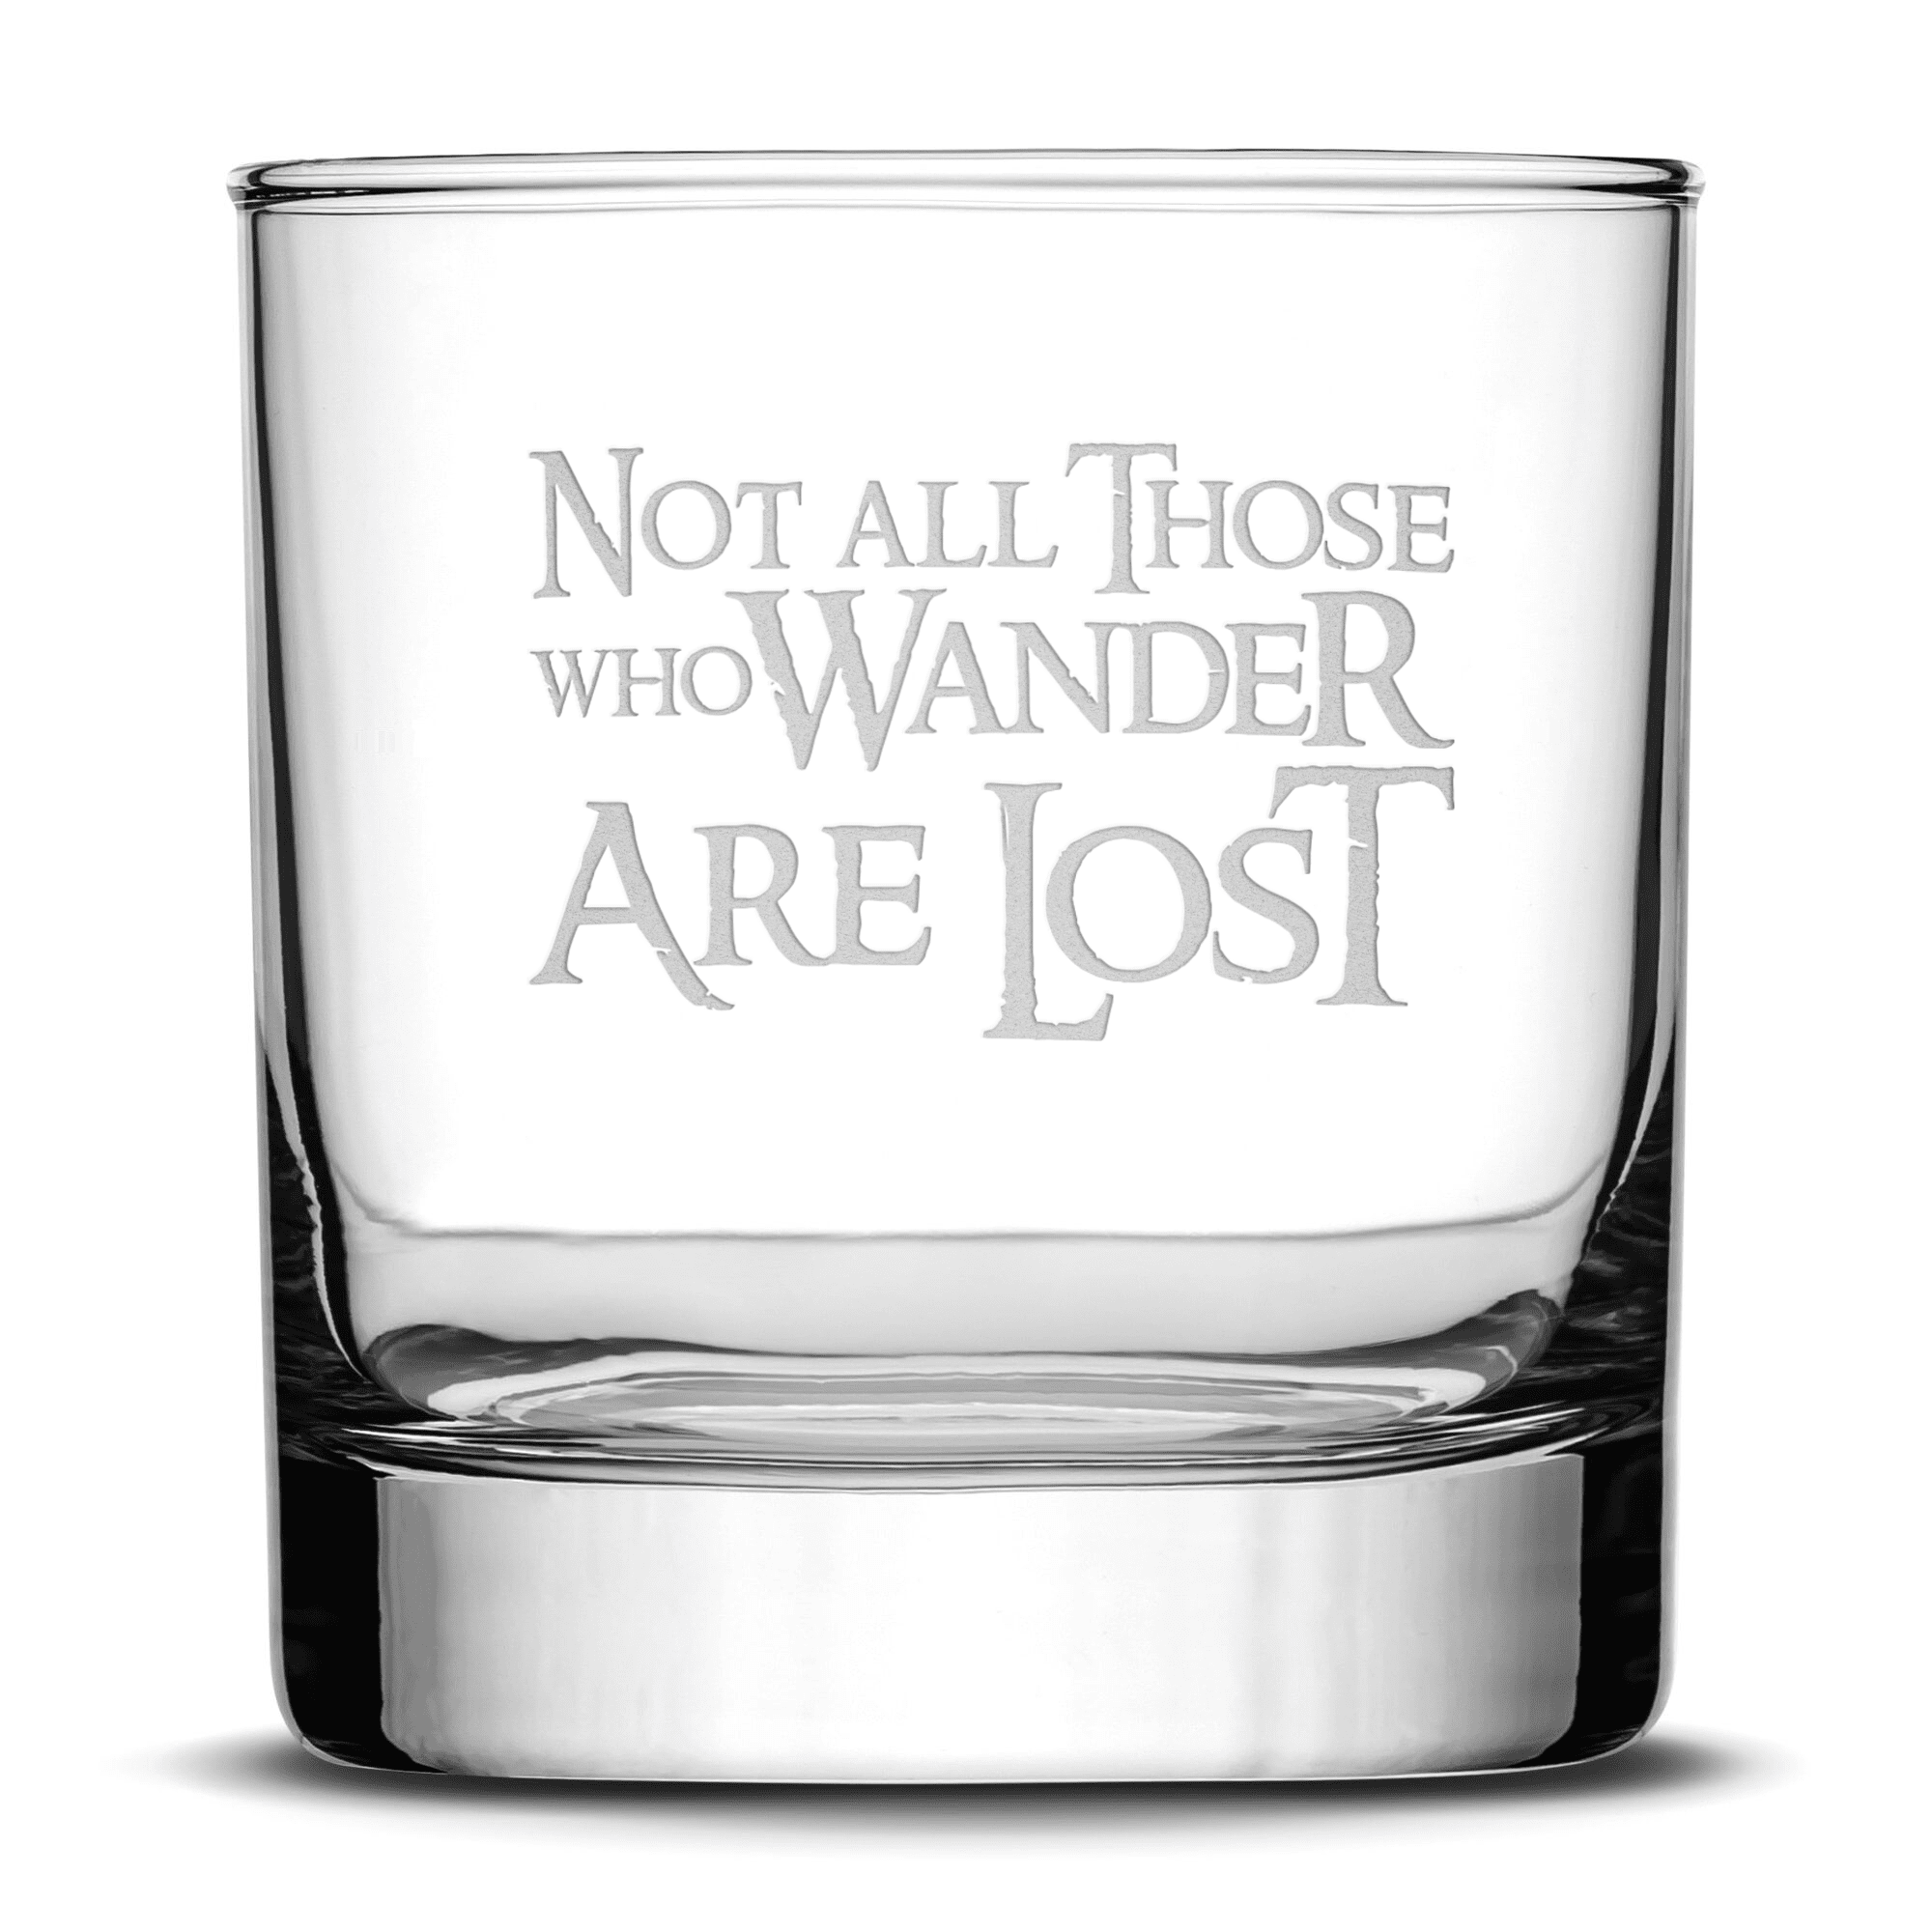 Whiskey Glass with Lord of the Rings Quote, Not All Those Who Wander Are Lost by Integrity Bottles